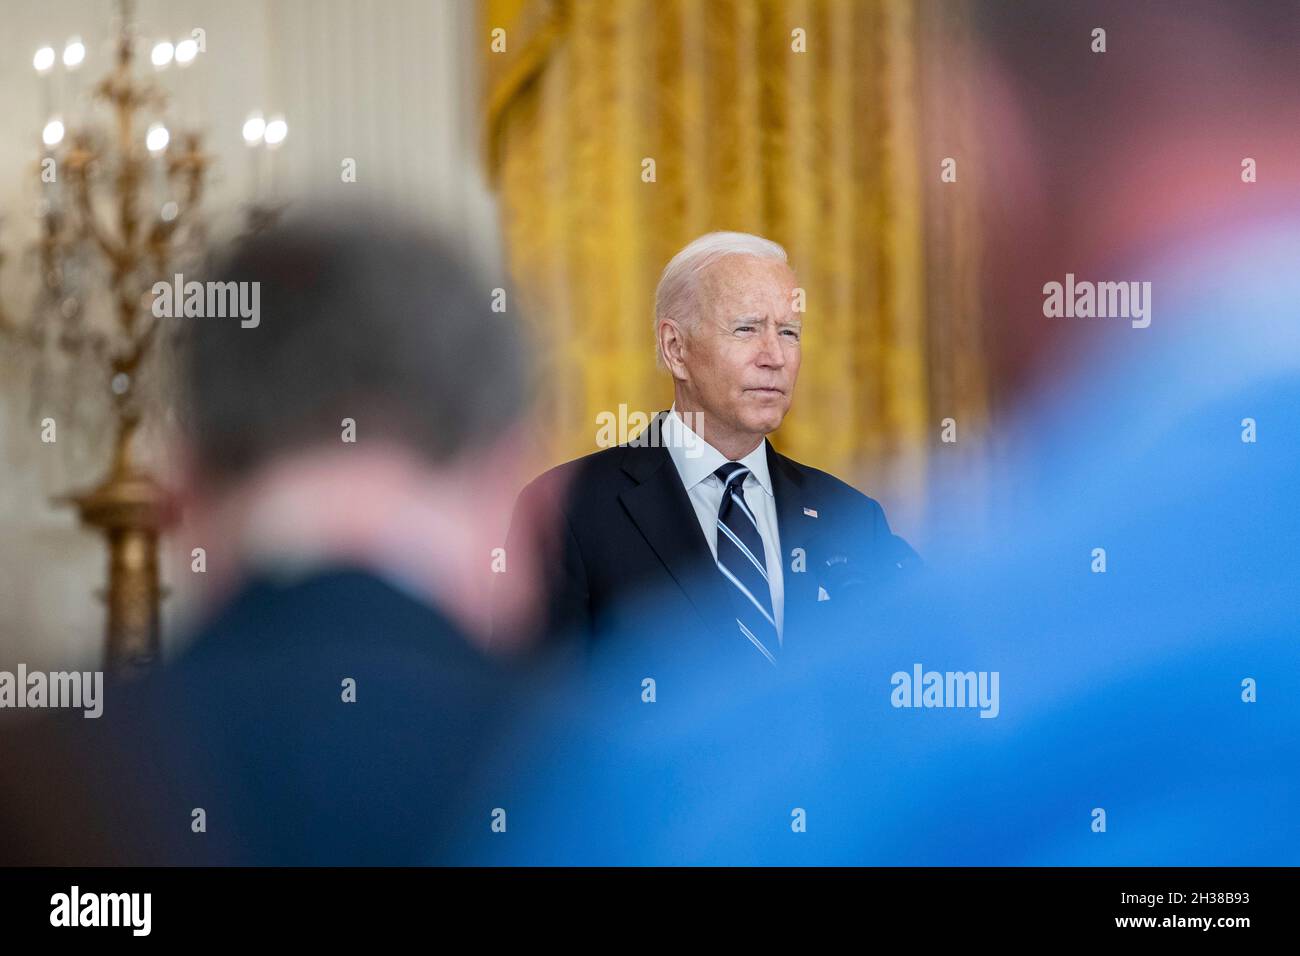 Washington, United States of America. 18 August, 2021. U.S President Joe Biden delivers remarks about the COVID-19 response and vaccination program from the East Room of the White House, August 18, 2021 in Washington, D.C.Credit: Carlos Fyfe/White House Photo/Alamy Live News Stock Photo